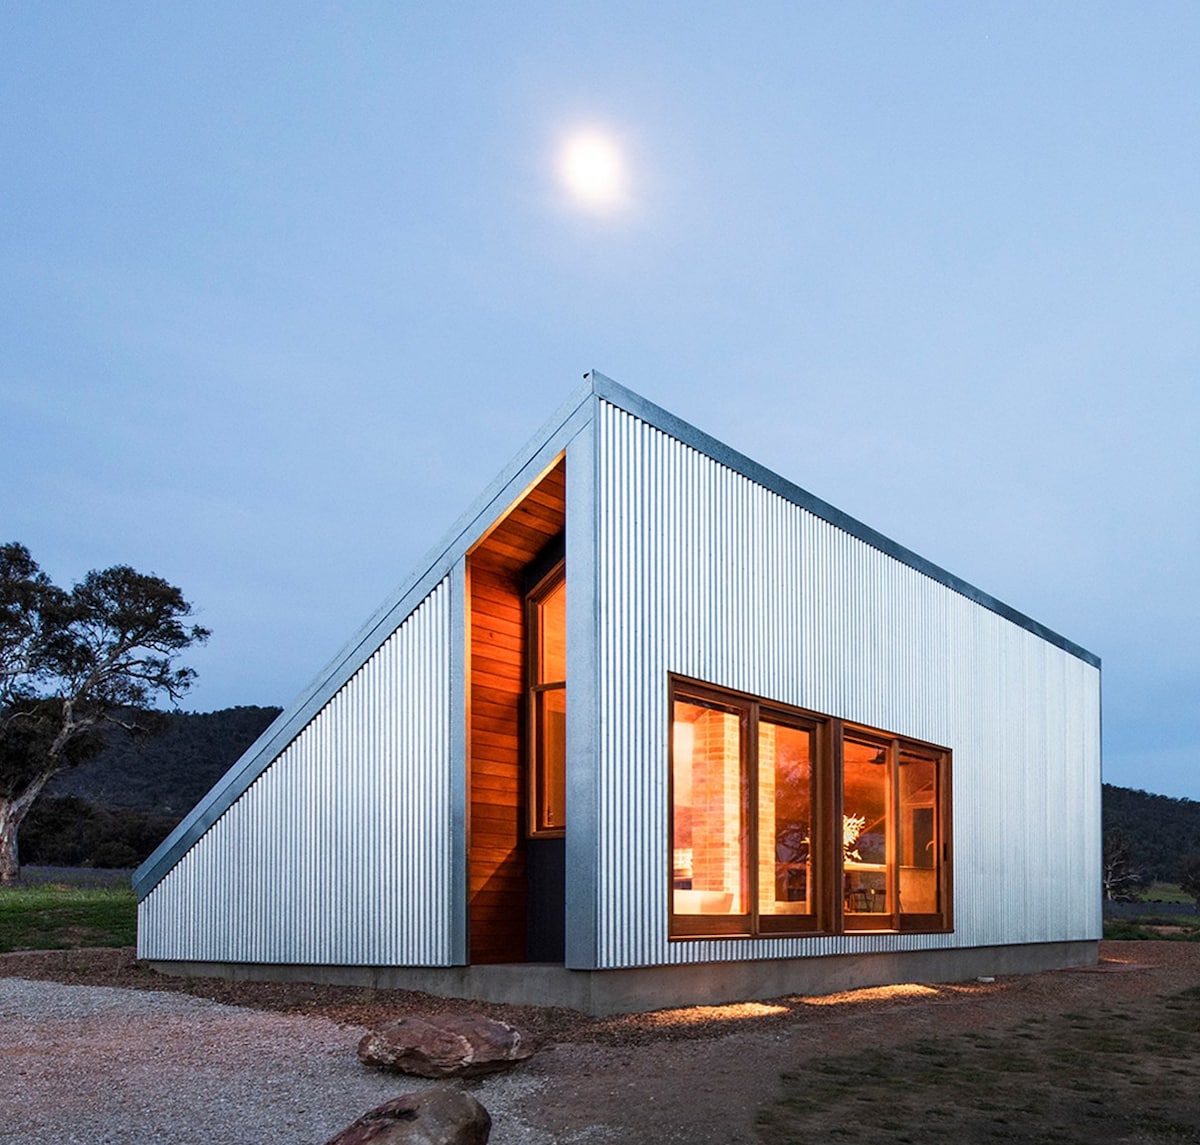 A Cameron Anderson Architects home sits below a full moon. Its windows and large open doorway show a warm, wooden interior as the corrugated metal ridges of its outer walls reflect the moonlight.